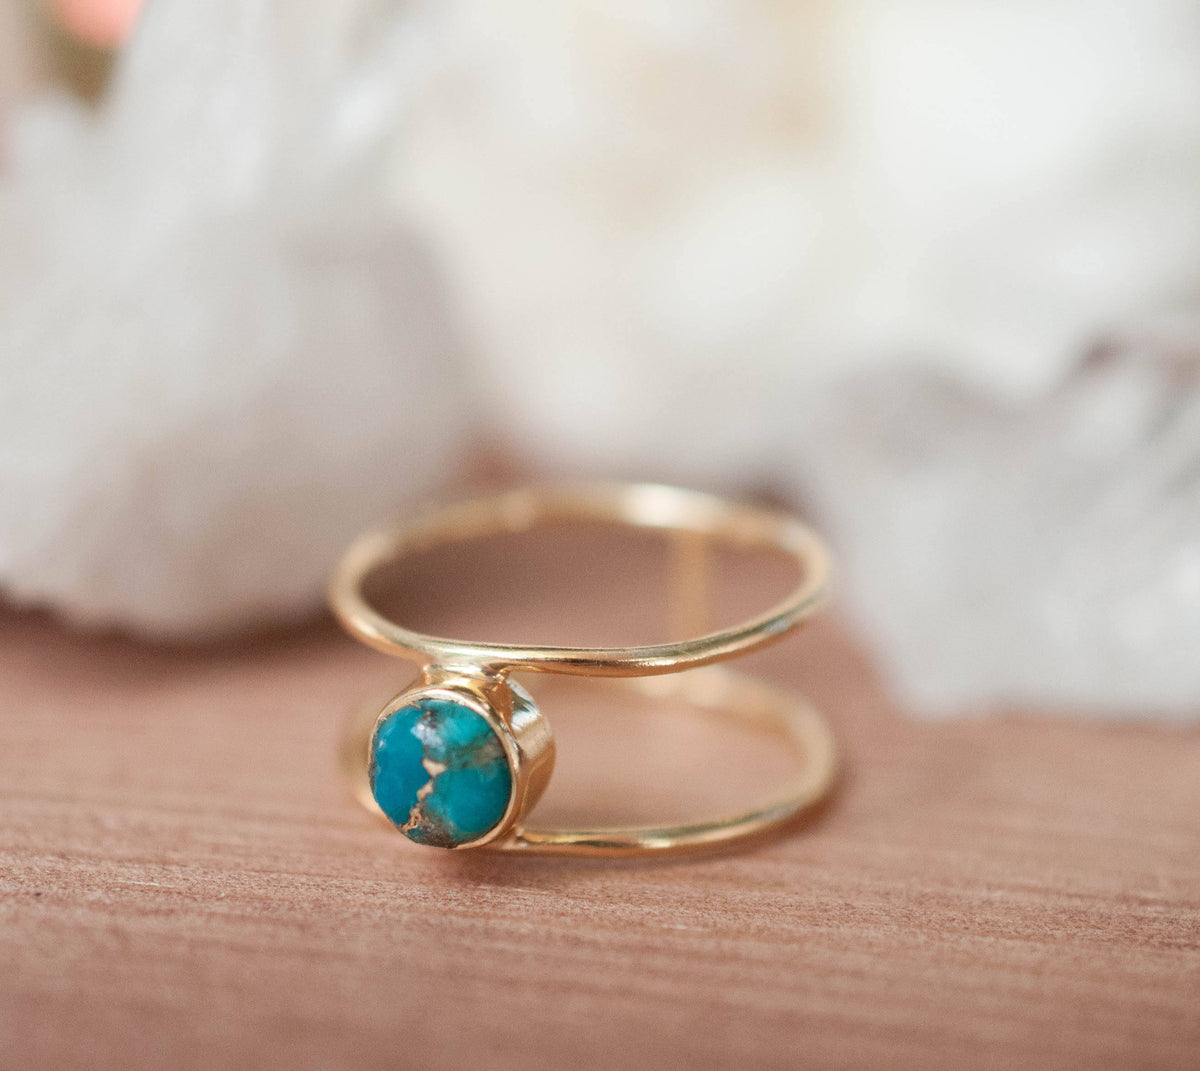 Copper Turquoise Ring * Gold * Statement * Gemstone * Natural * Organic * Ocean * Blue * Mermaid * Handmde * Double Band * Everyday BJR026